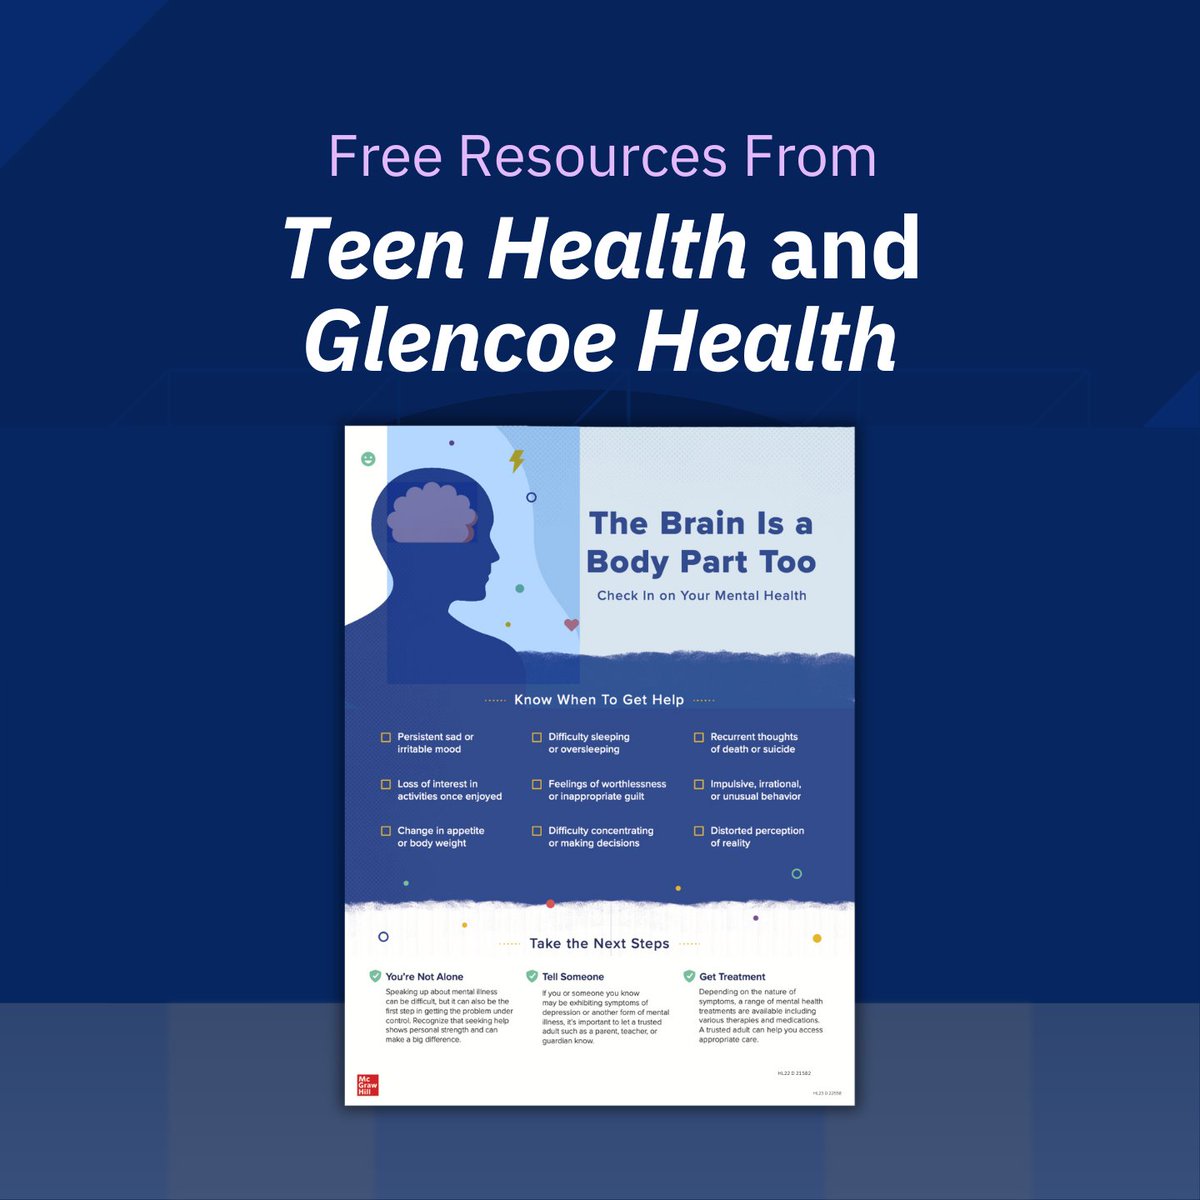 Encourage #Students to check in on their mental health with this free #Classroom poster with comprehensive wellness strategies to know when to get help & how to take the next steps in bettering their mental health. Download it from Glencoe & Teen Health. mhed.us/3VCJCqq